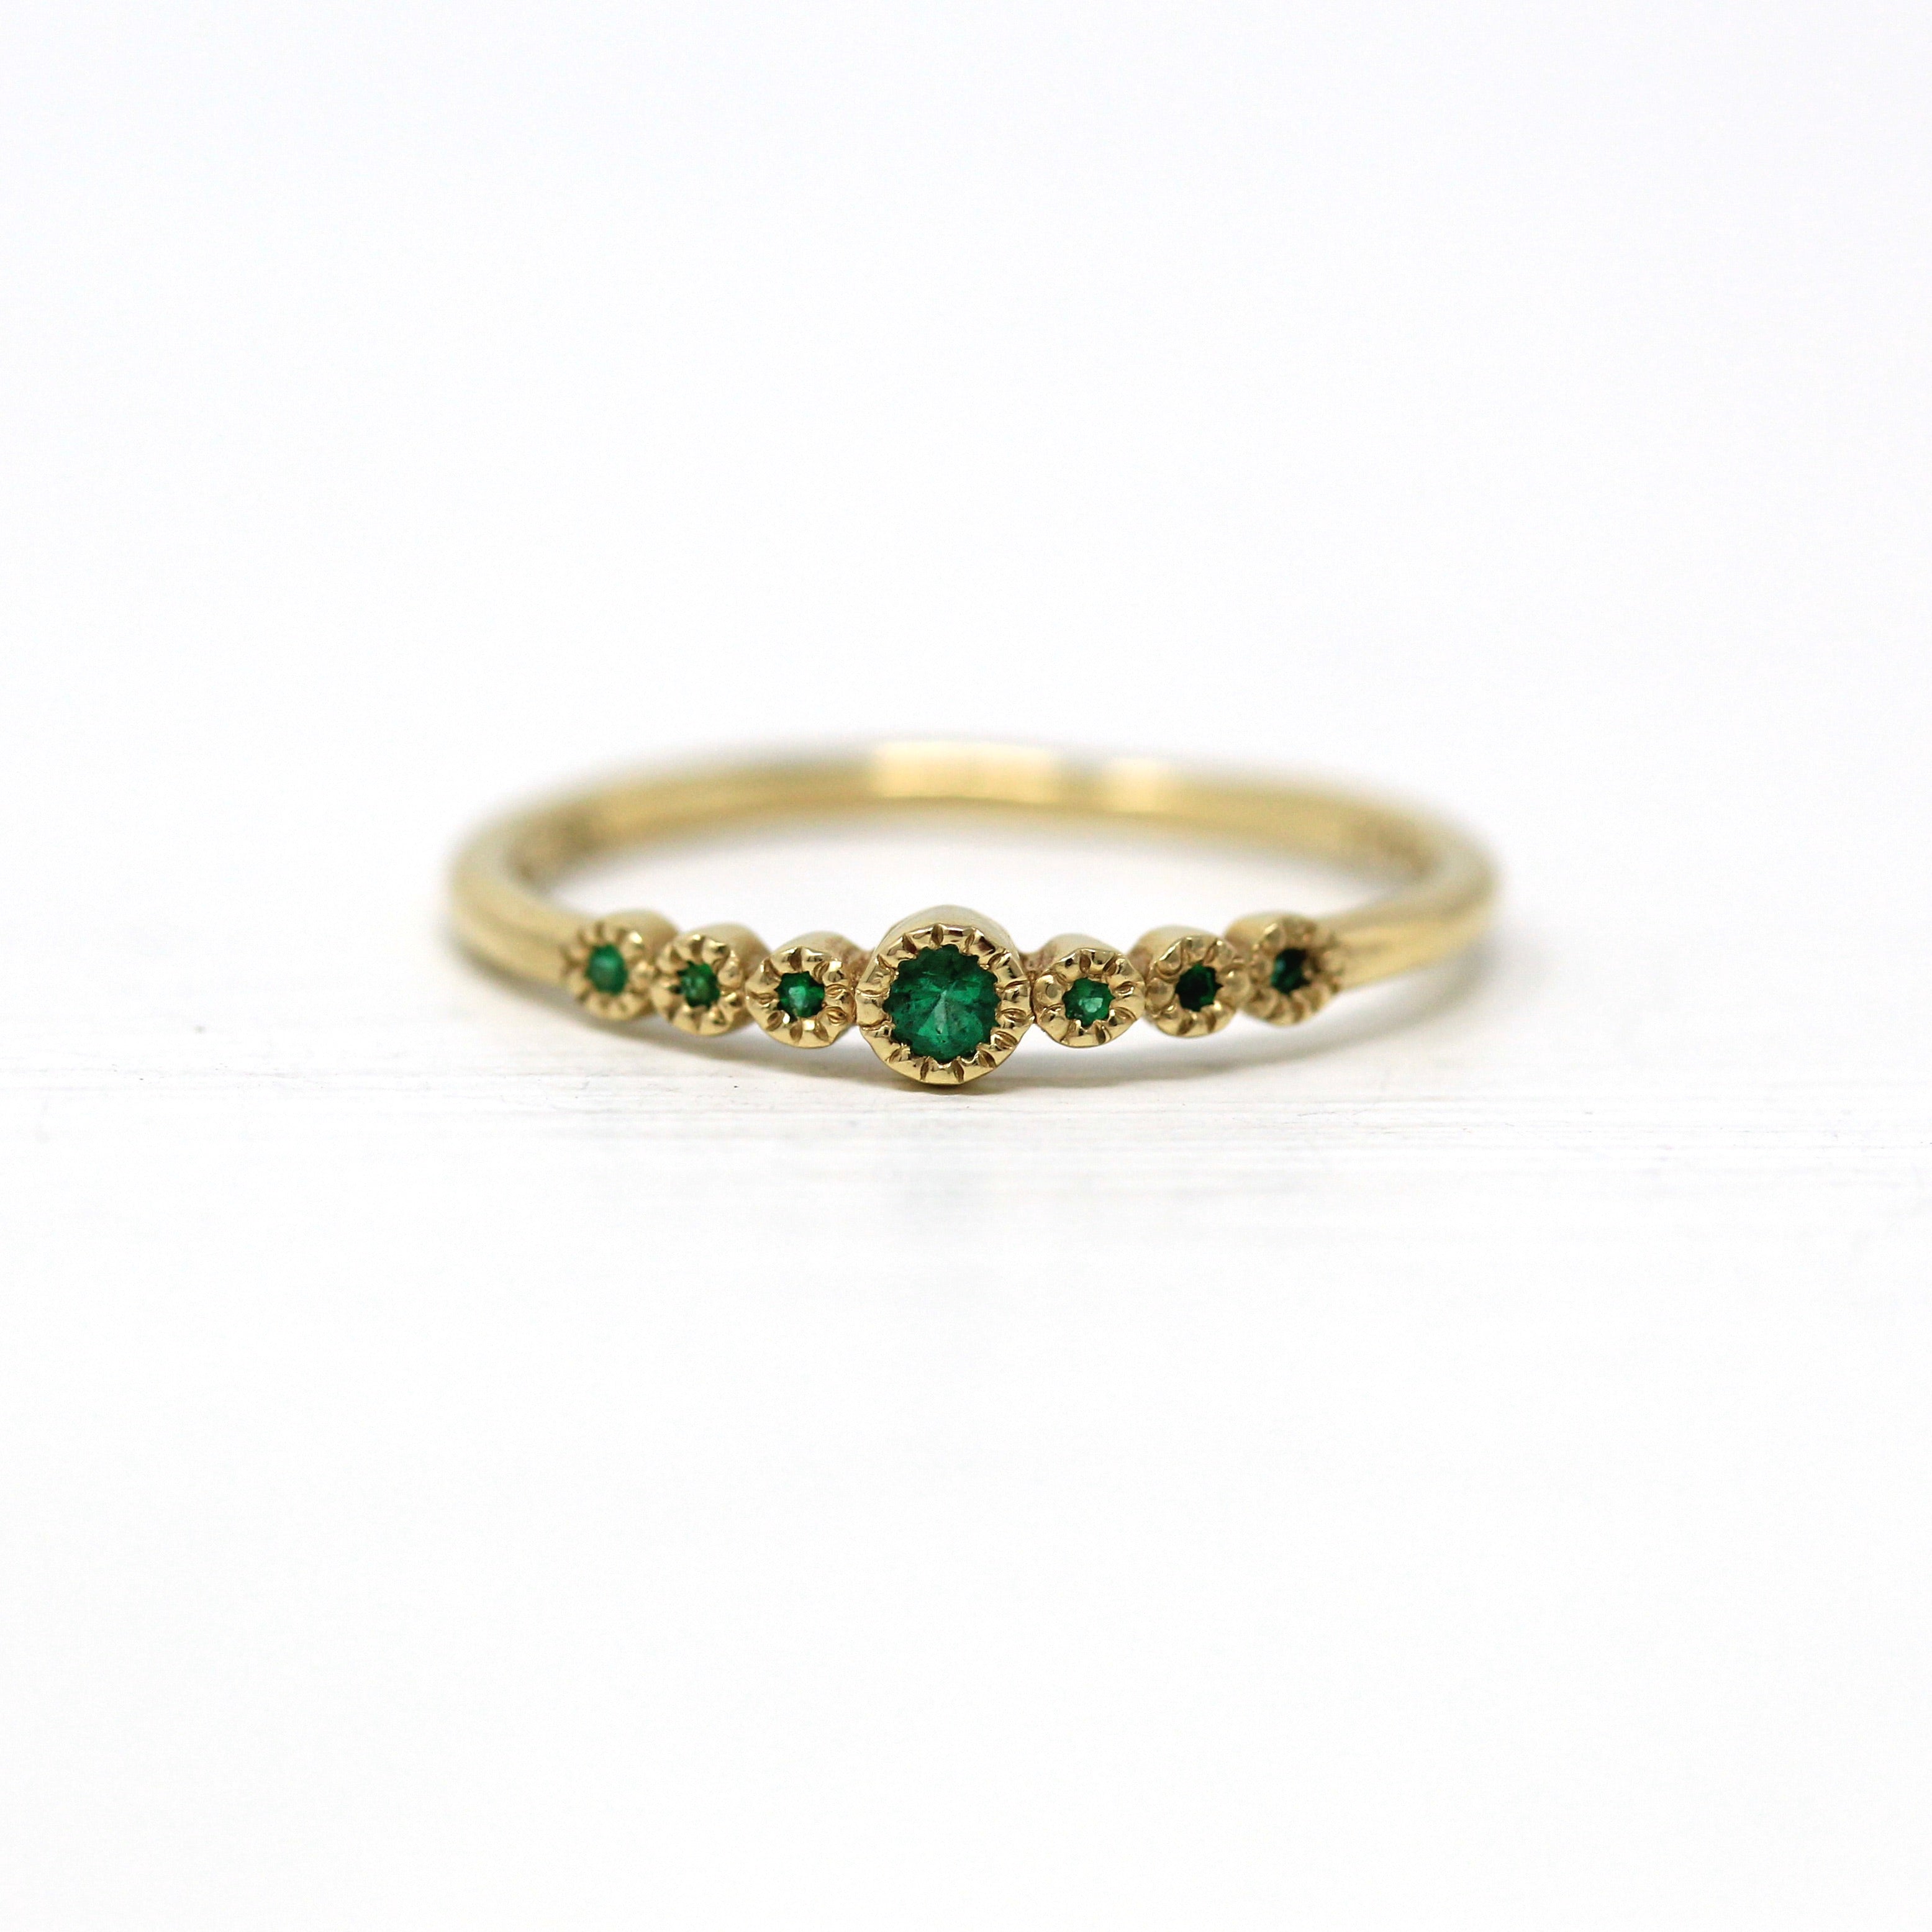 Custom Men's Emerald Ring | Exquisite Jewelry for Every Occasion | FWCJ